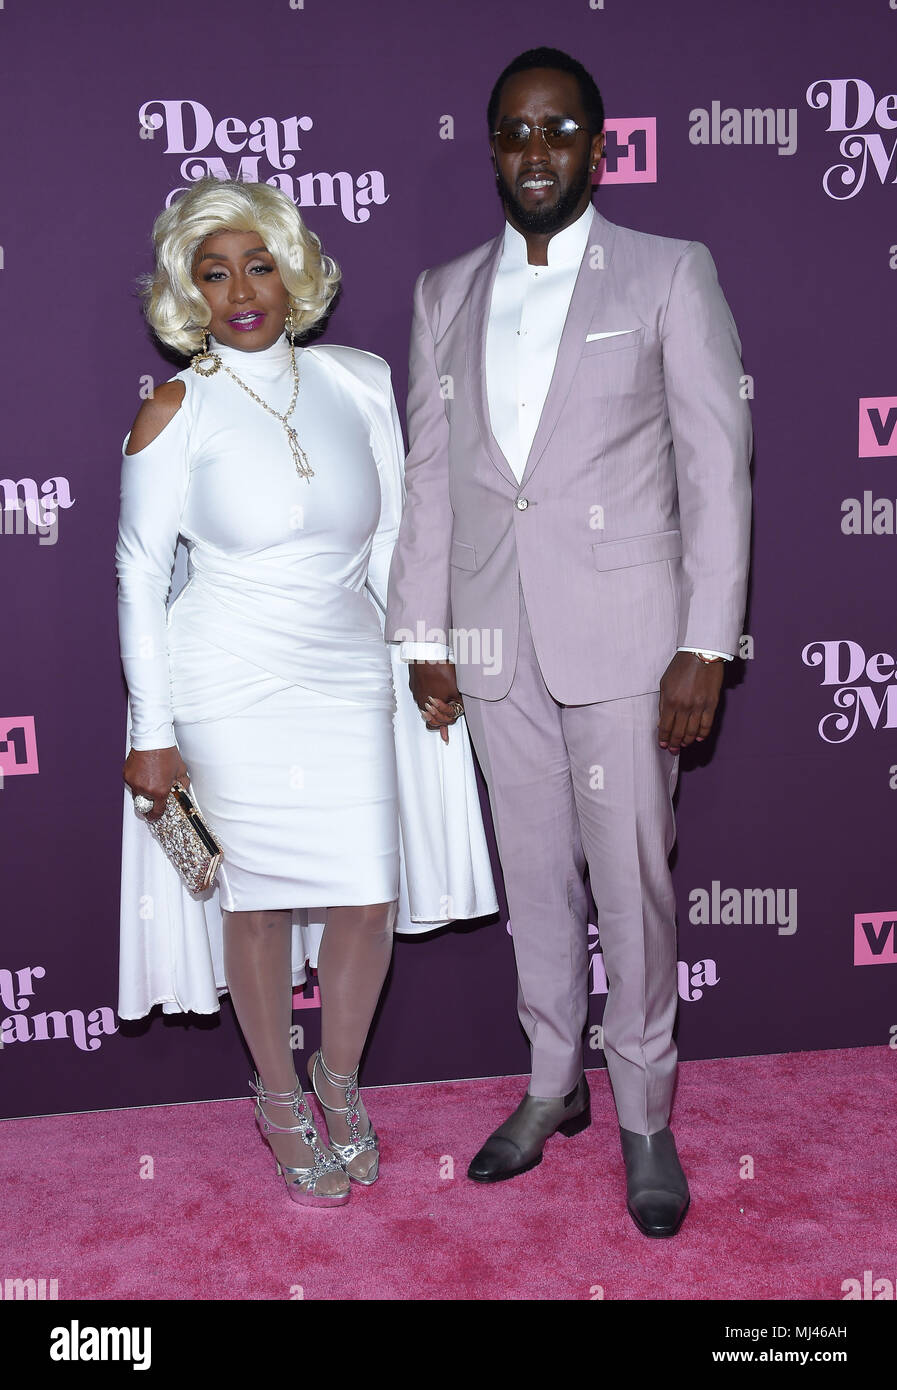 Los Angeles, California, USA. 3rd May, 2018. Sean Diddy Combs and Janice Combs arrives for the VH1's 3rd Annual 'Dear Mama: A Love Letter to Moms' at the Theatre at the Ace Hotel. Credit: Lisa O'Connor/ZUMA Wire/Alamy Live News Stock Photo